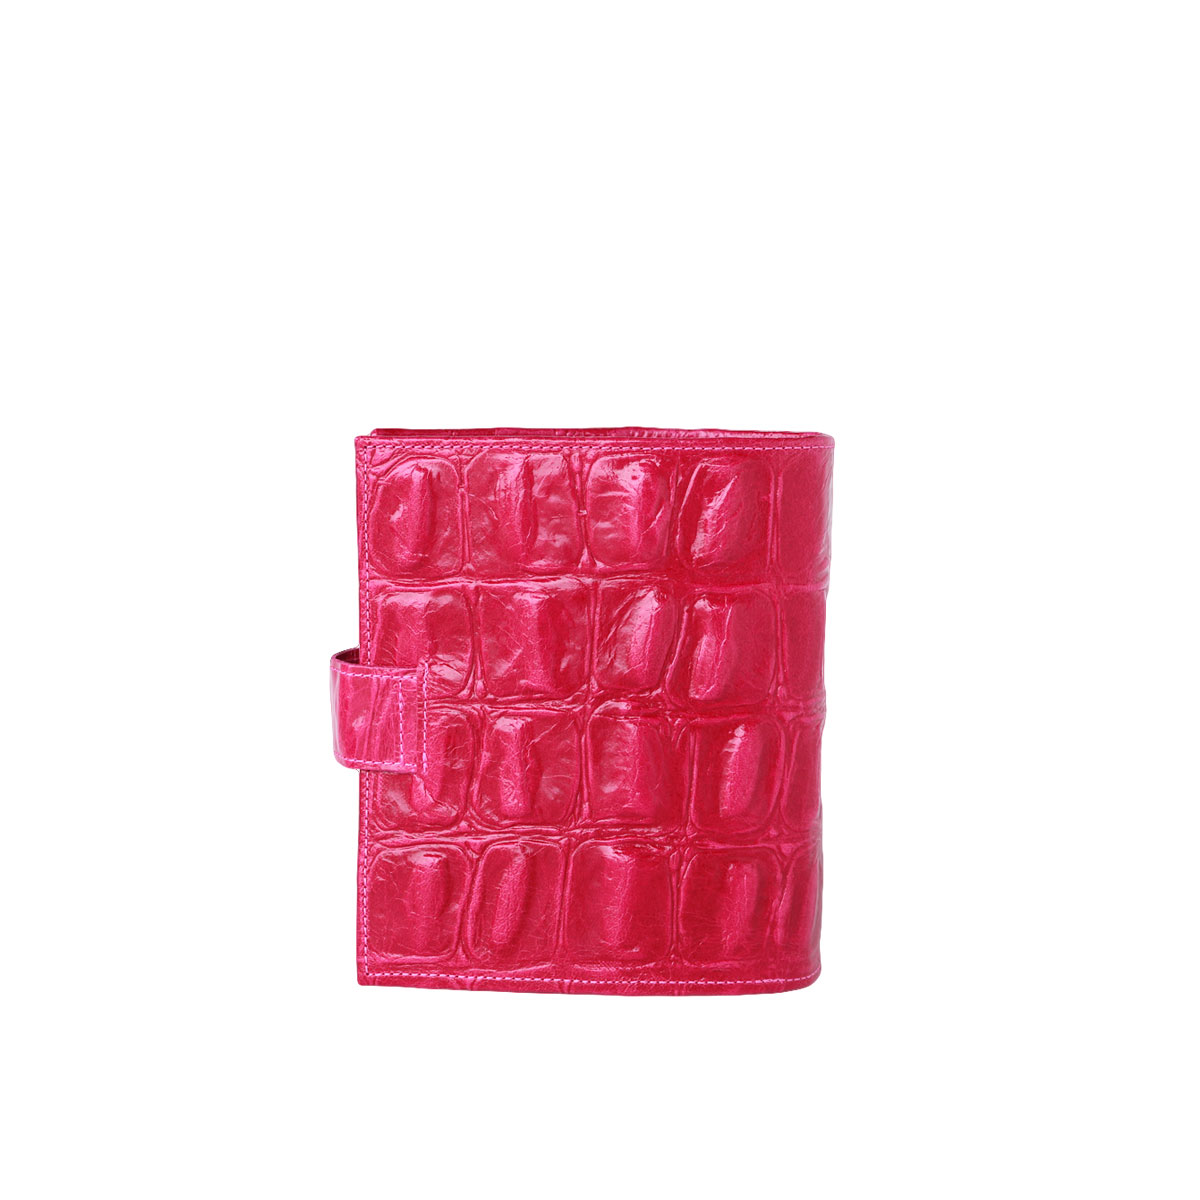 ringplaner personal wide pink